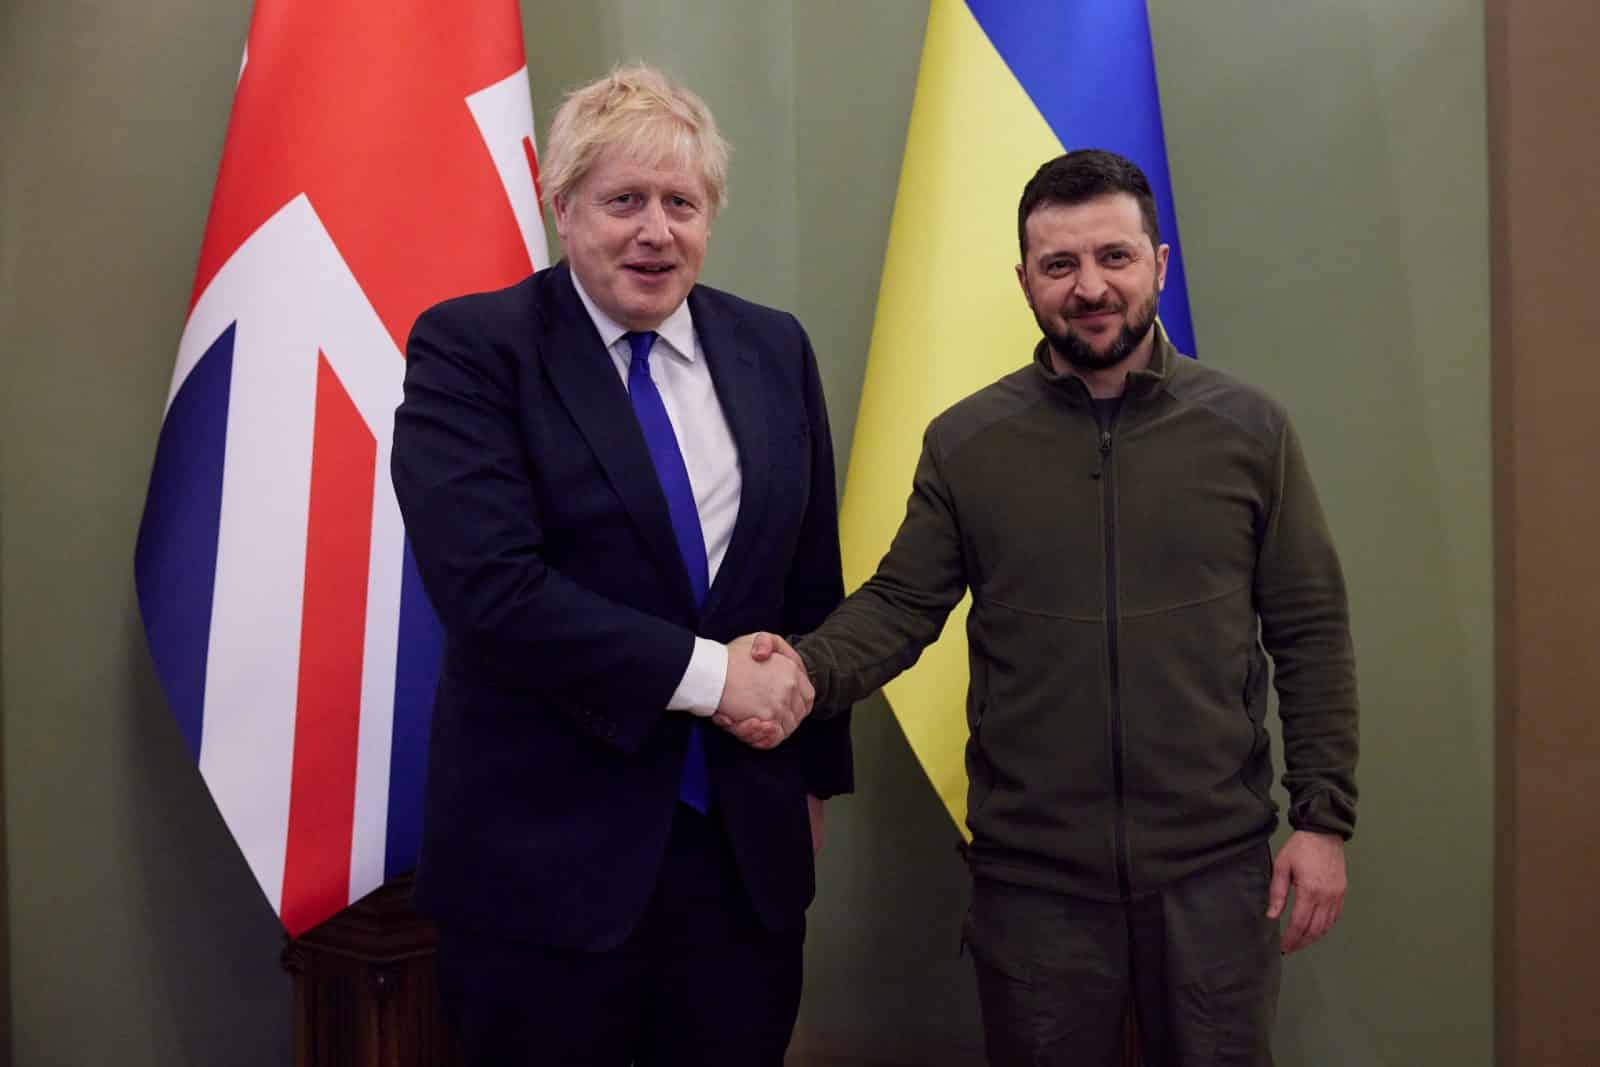 The UK will be “honoured” to receive the President of Ukraine as a guest in Great Britain